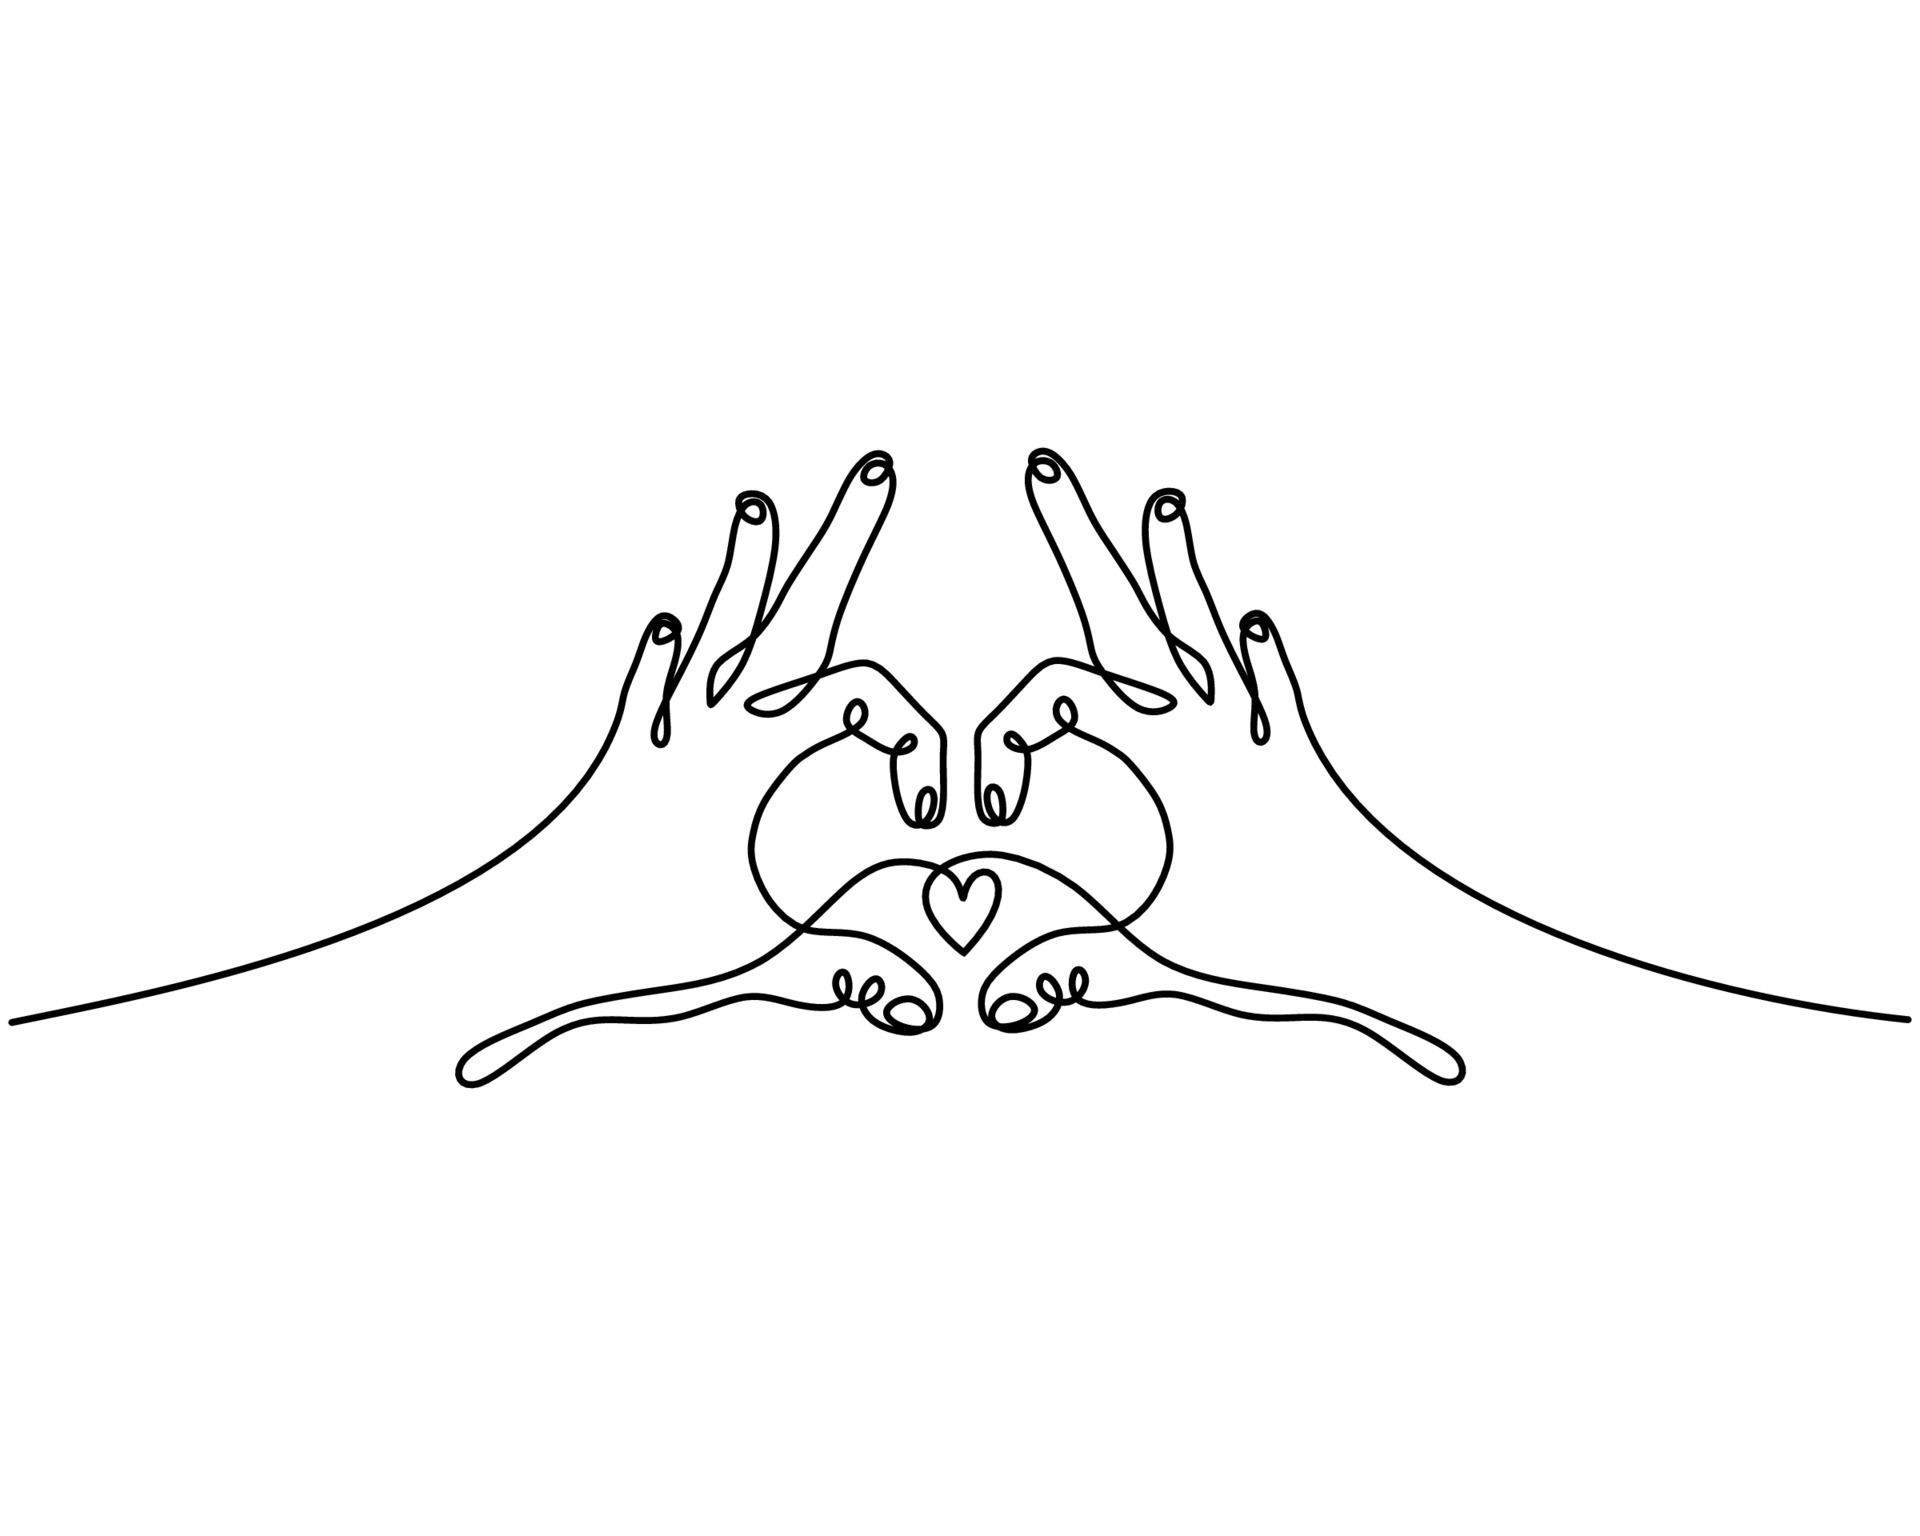 One Continuous Single Line Of Two Hand Make Heart Pose With Fingers 5081771 Vector Art At Vecteezy